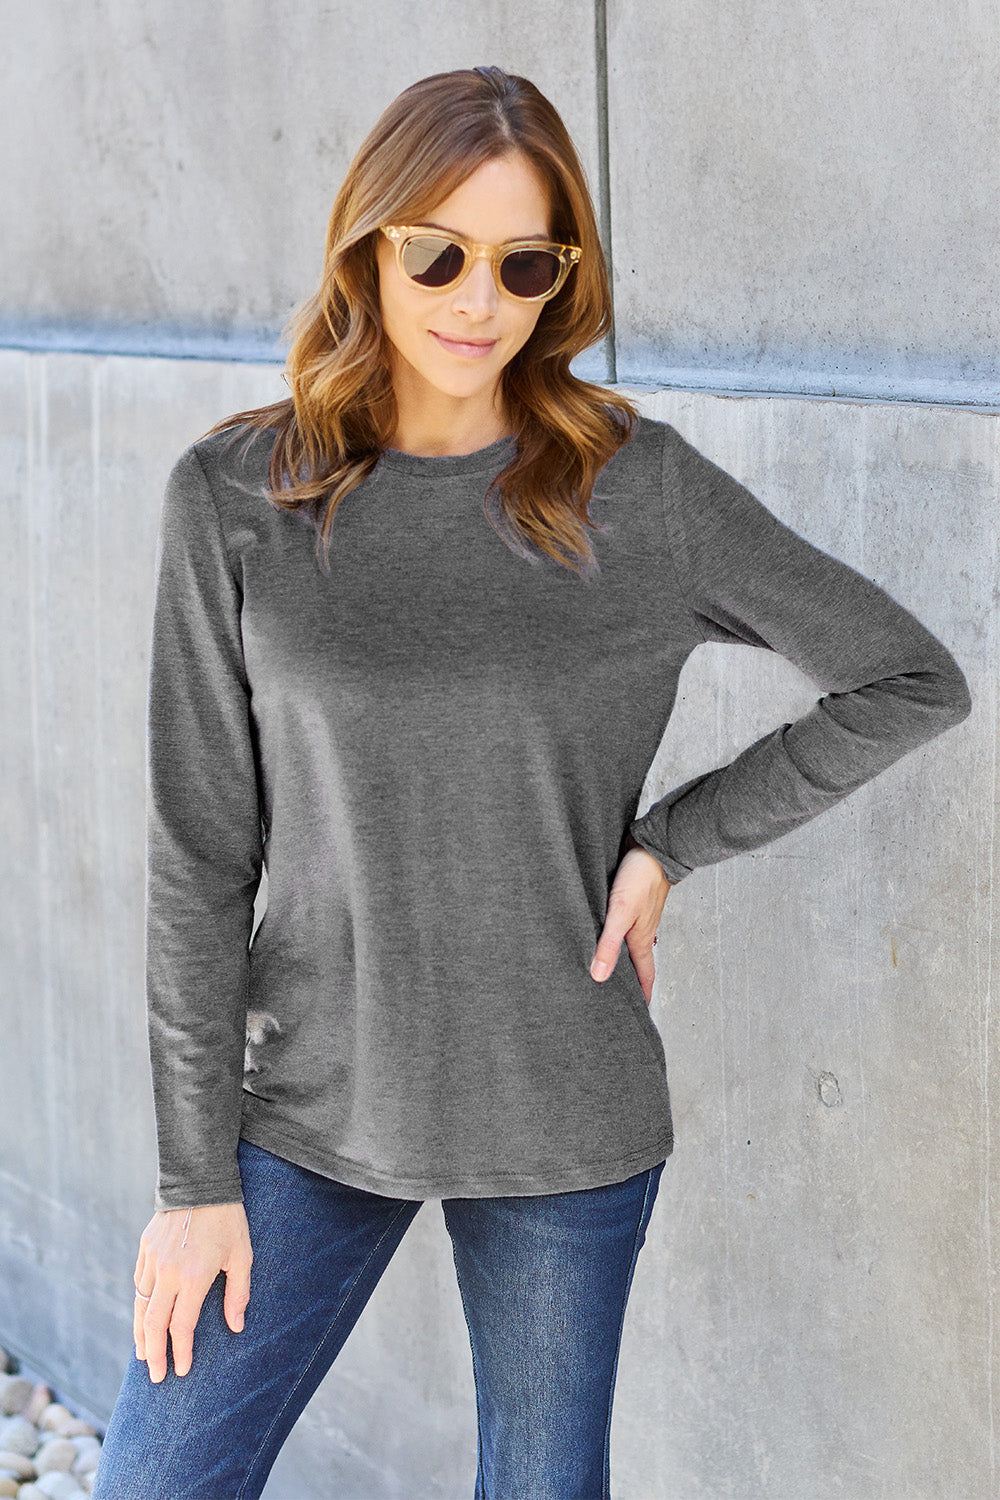 Long Sleeve Crew Neck Tee Womens - Inspired Eye Boutique